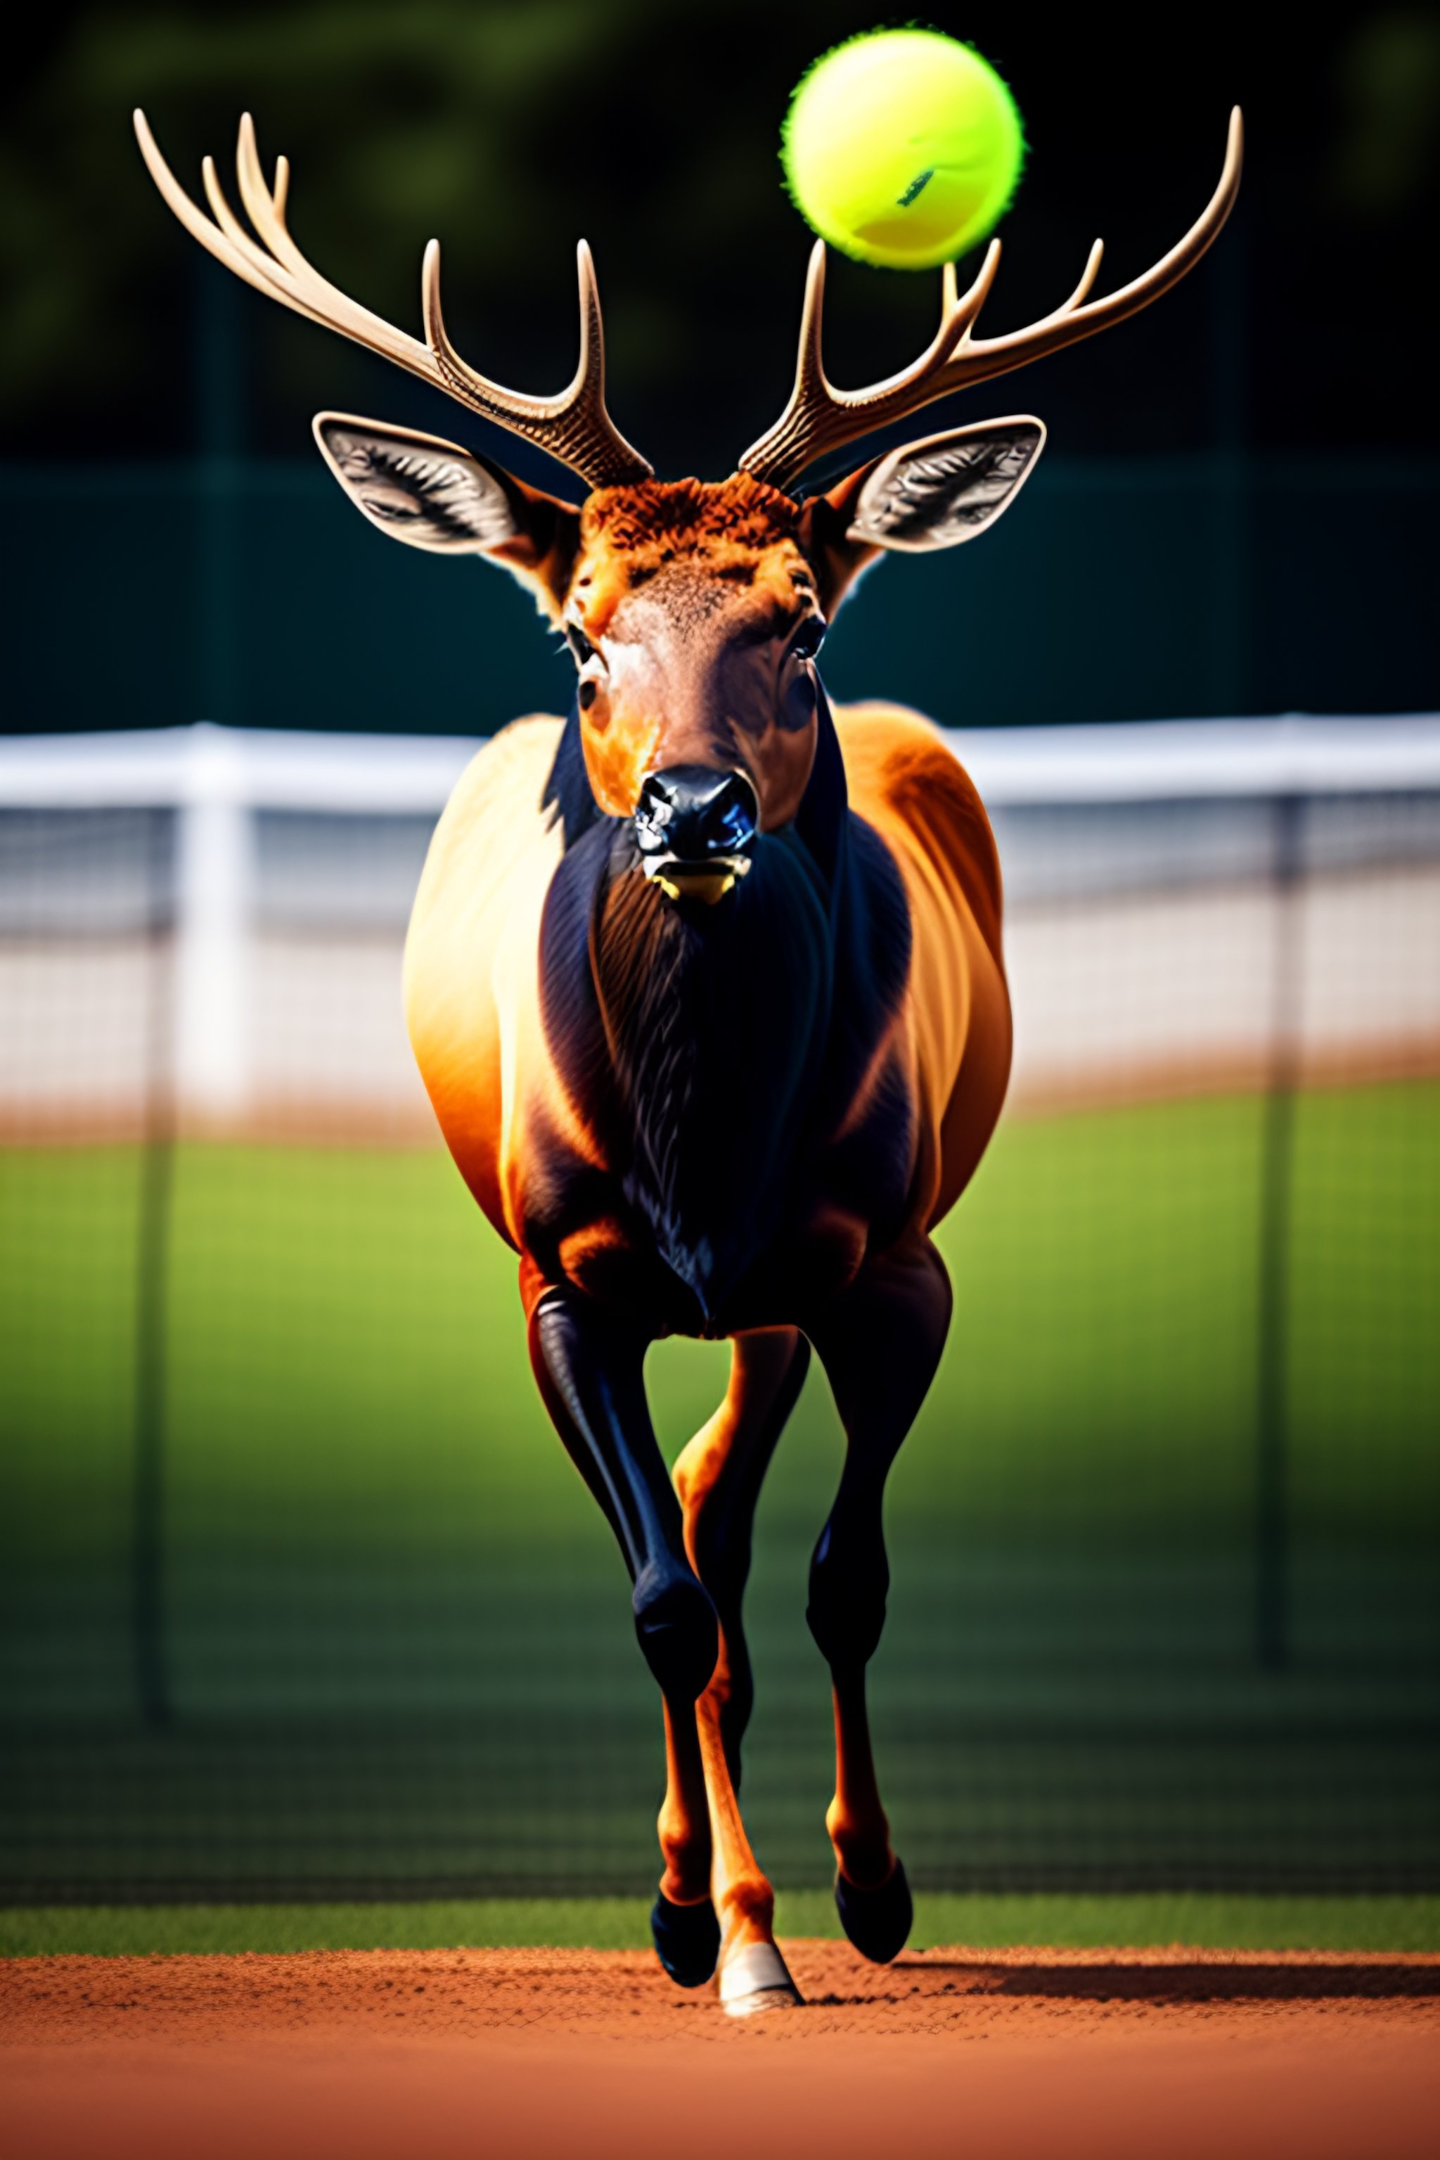 Remote.tools shares a list of Animal-themed tennis team names